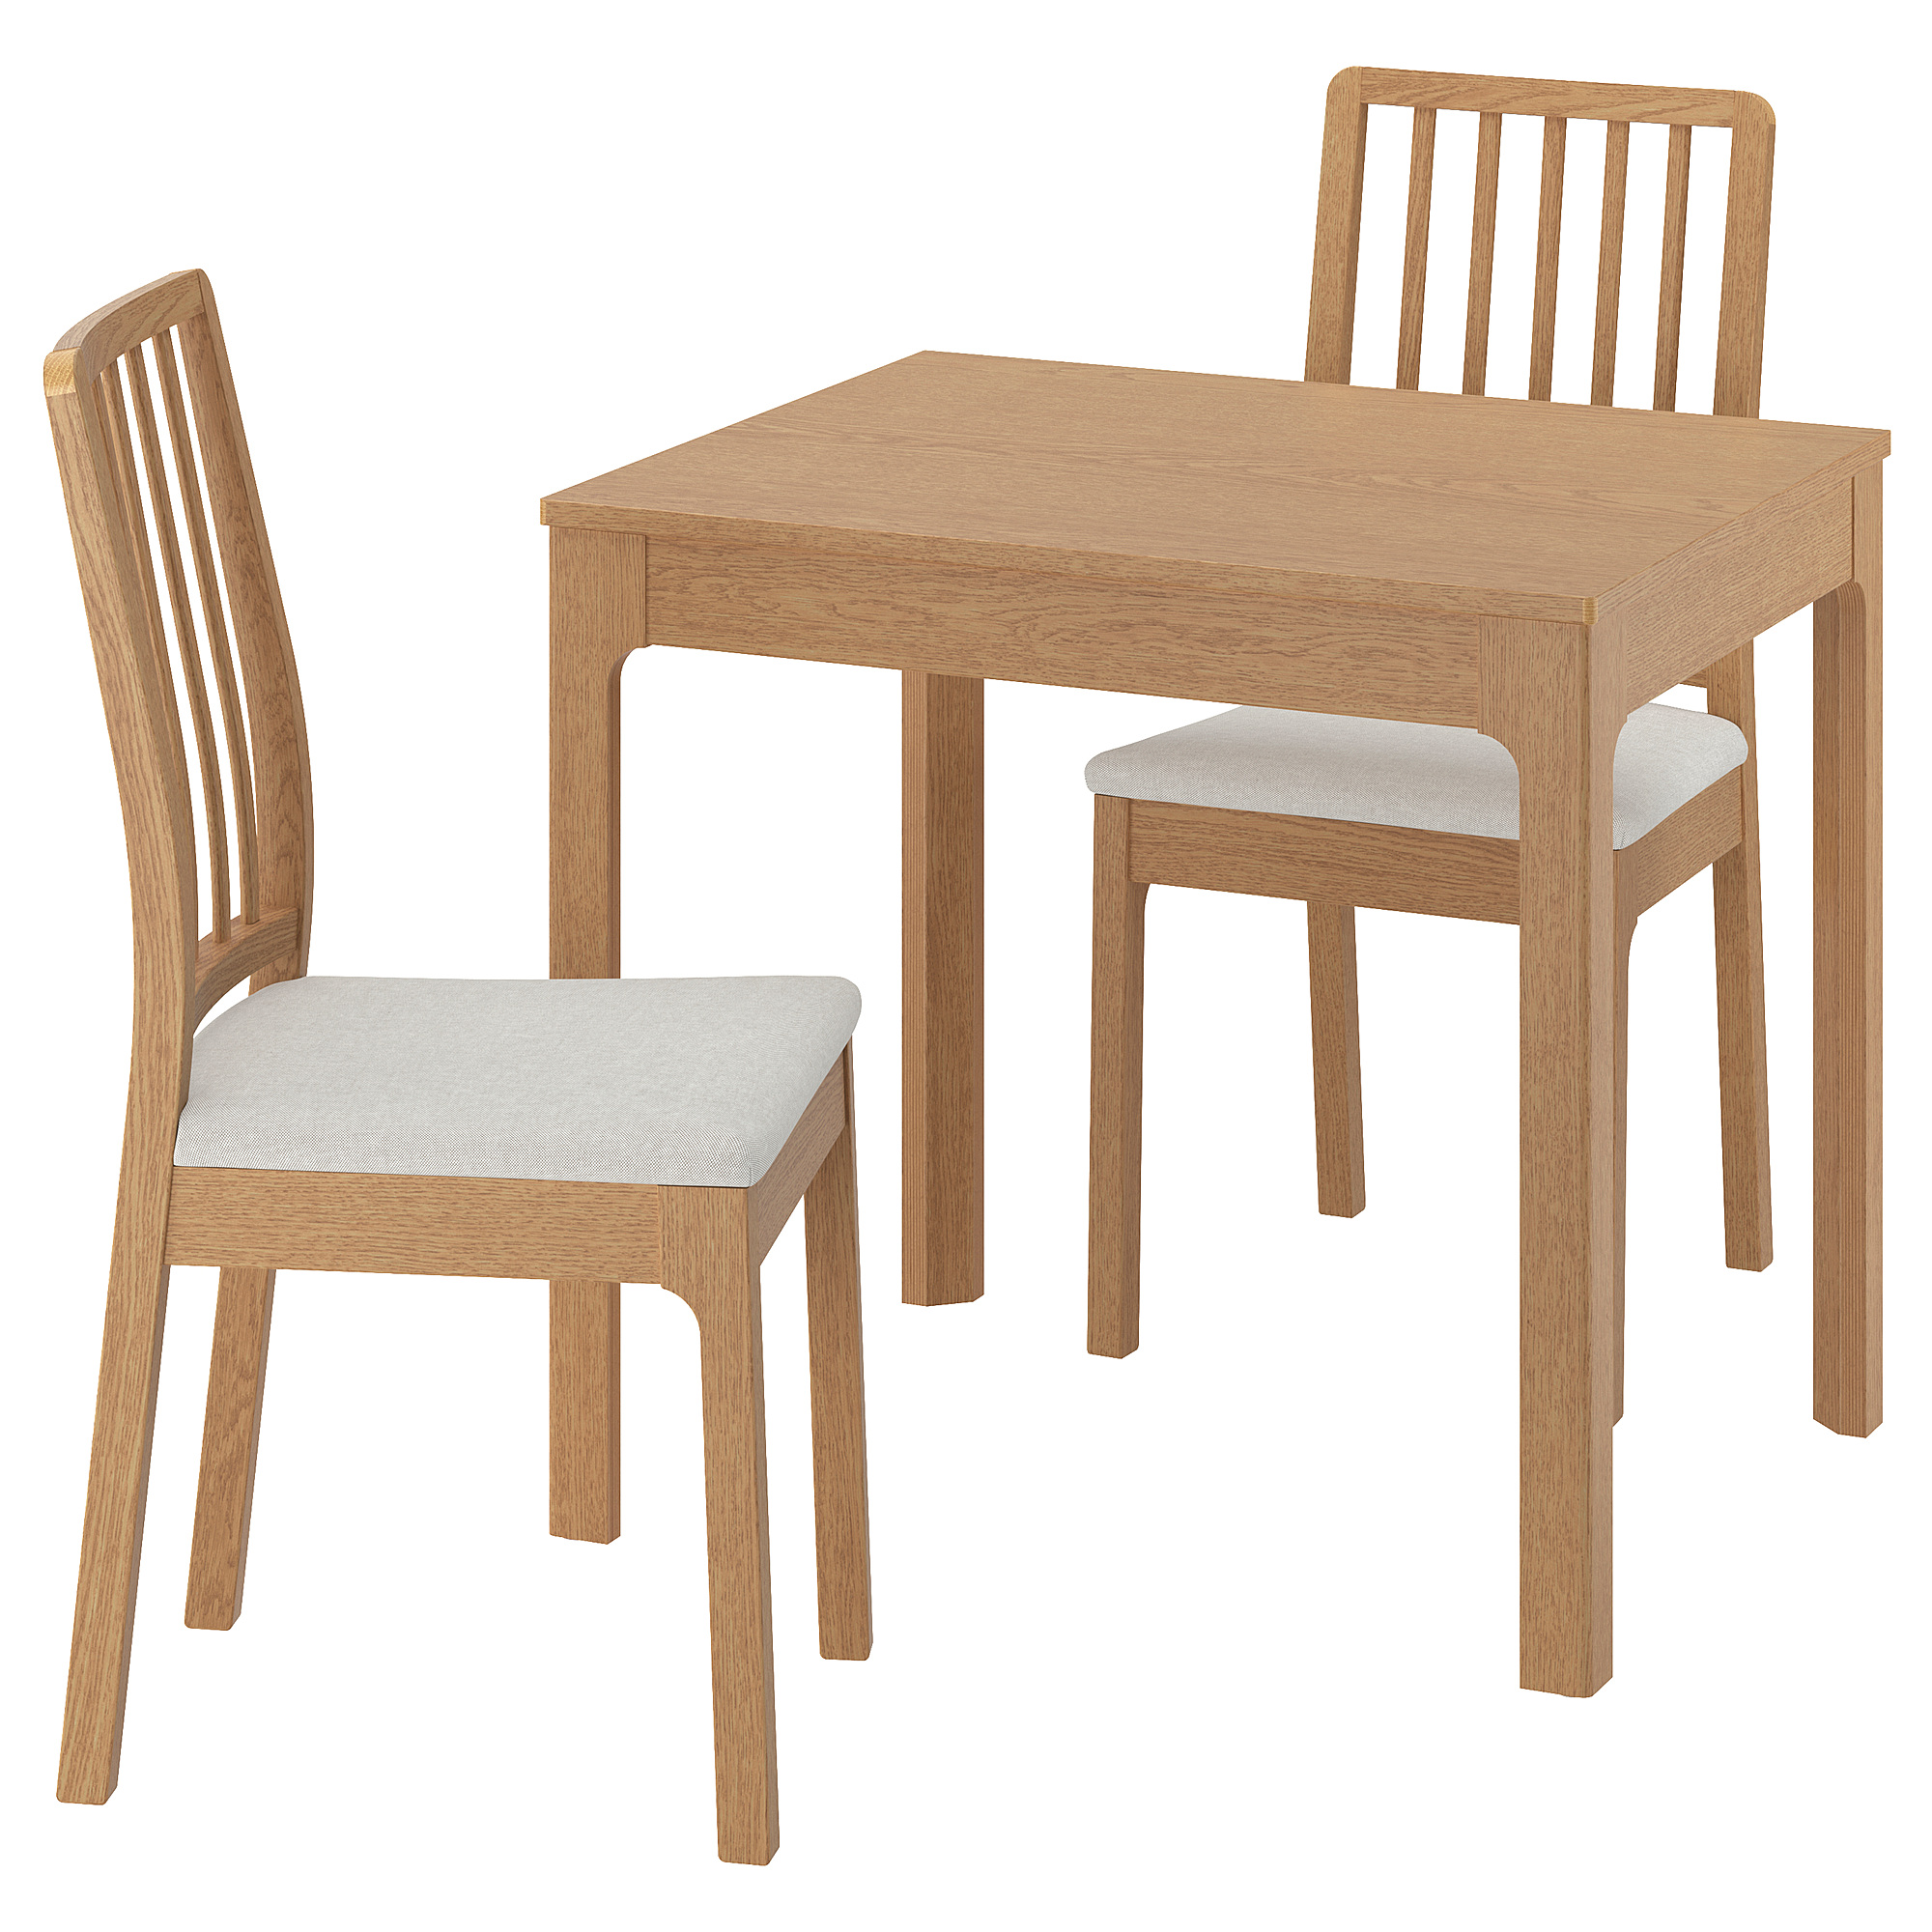 EKEDALEN/EKEDALEN table and 2 chairs